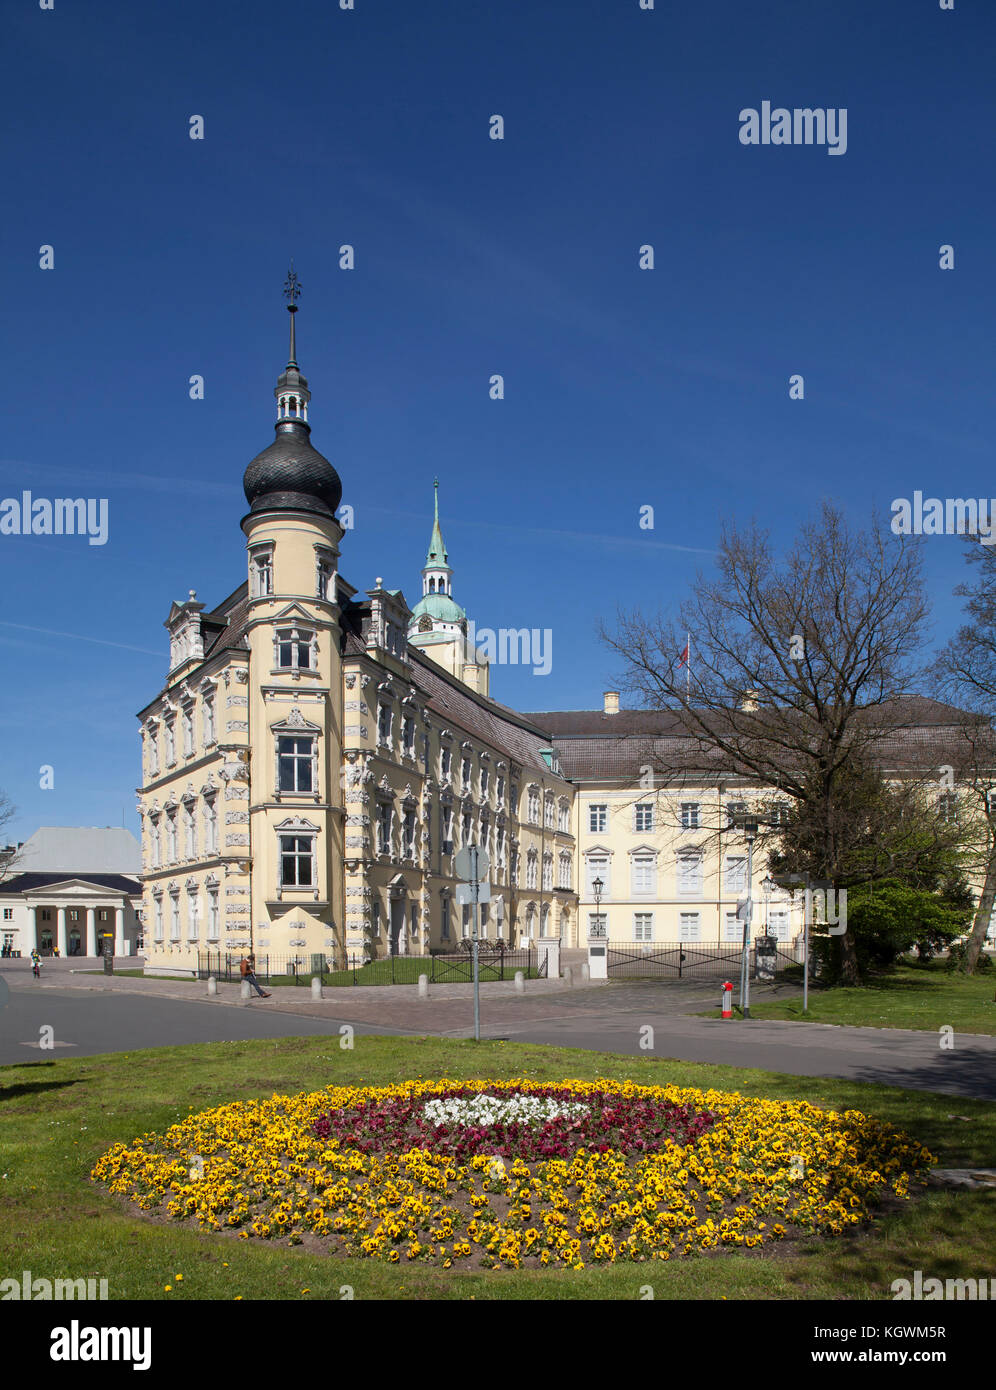 Oldenburg germany hi-res stock photography and images - Alamy